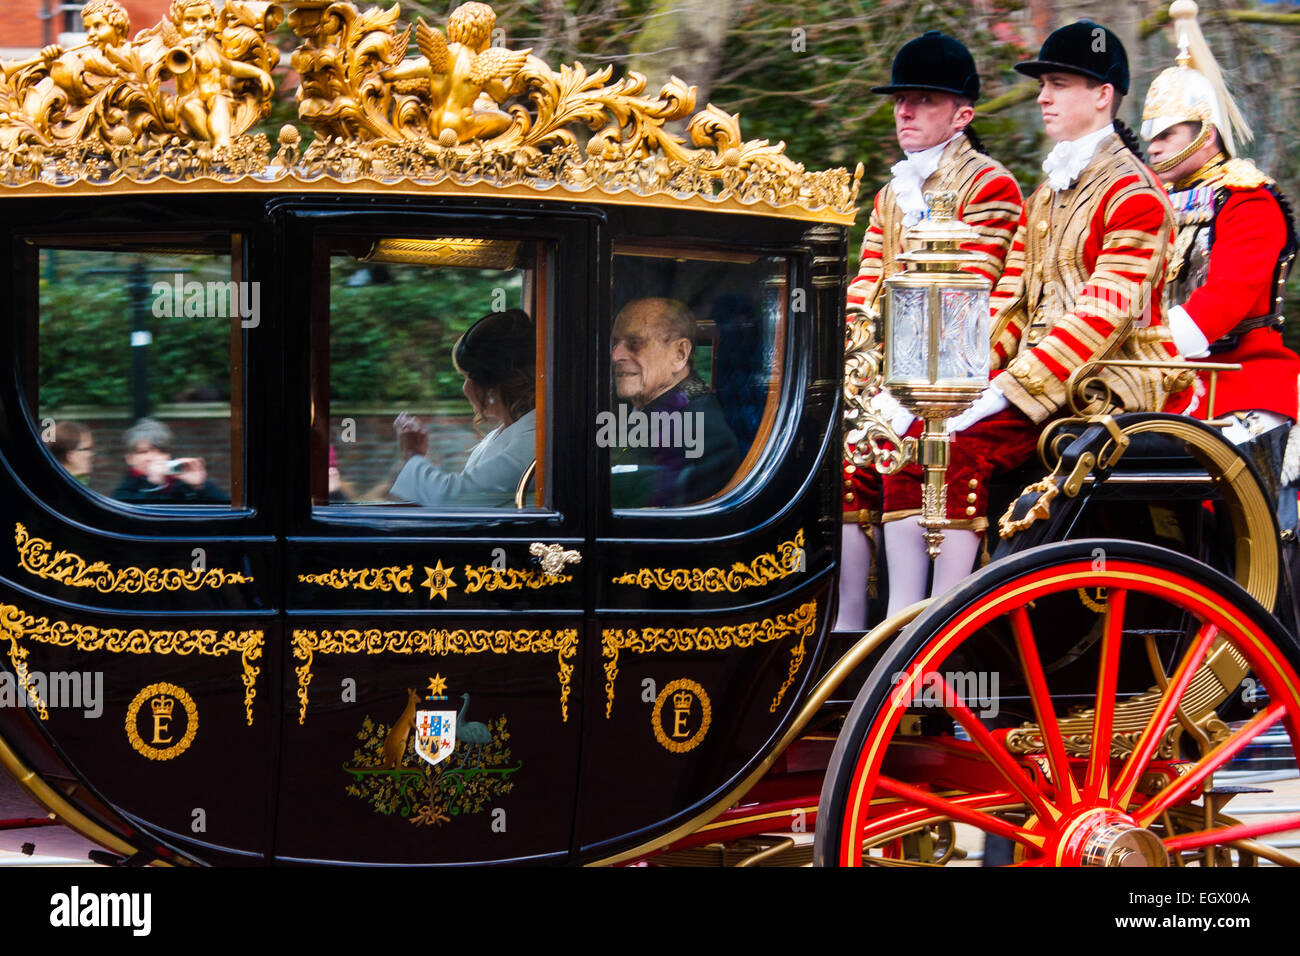 London, UK. 3rd March, 2015. Mexican President Enrique Pena Nieto travels with Her Majesty The Queen and other members of the Royal Family by State Carriage along the Mall towards a luncheon at Buckingham Palace after a ceremonial welcome at Horseguards Parade. PICTURED: The Duke of Edinburgh, Prince Philip. Credit:  Paul Davey/Alamy Live News Stock Photo